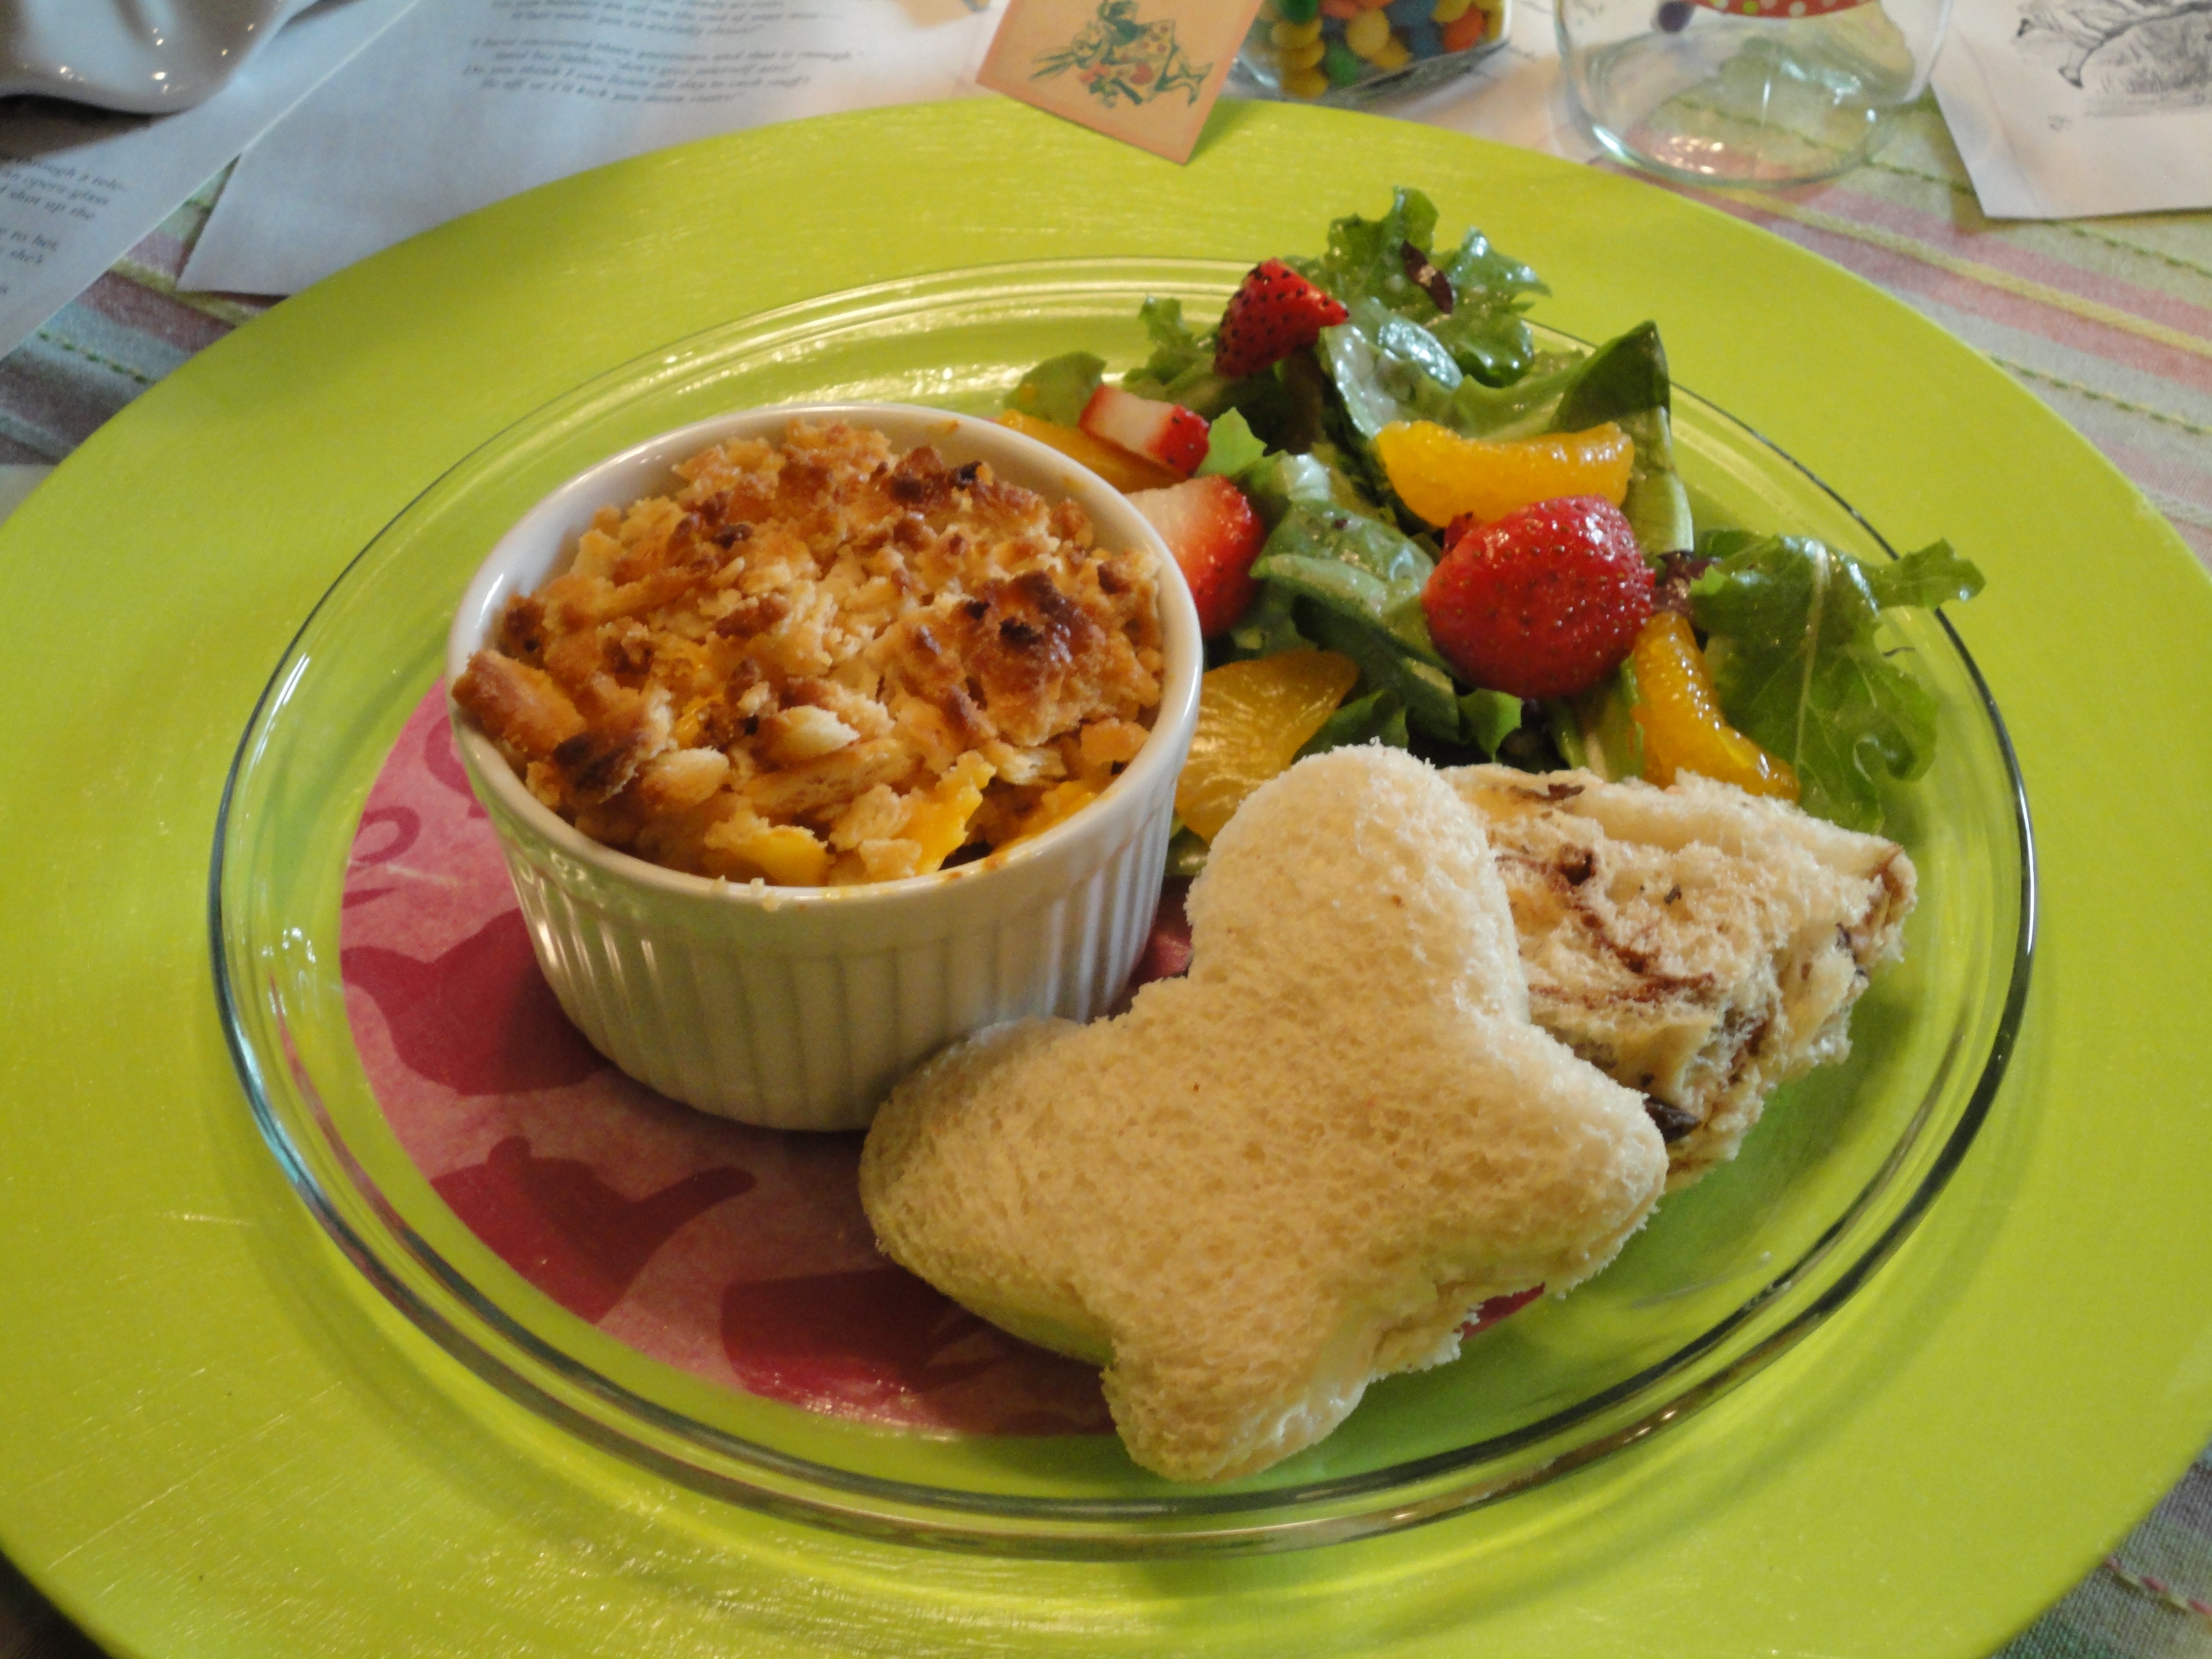 Individual casseroles of “Mad Hatter’s Bow Ties and Cheese” was offered along with salad and finger sandwiches.